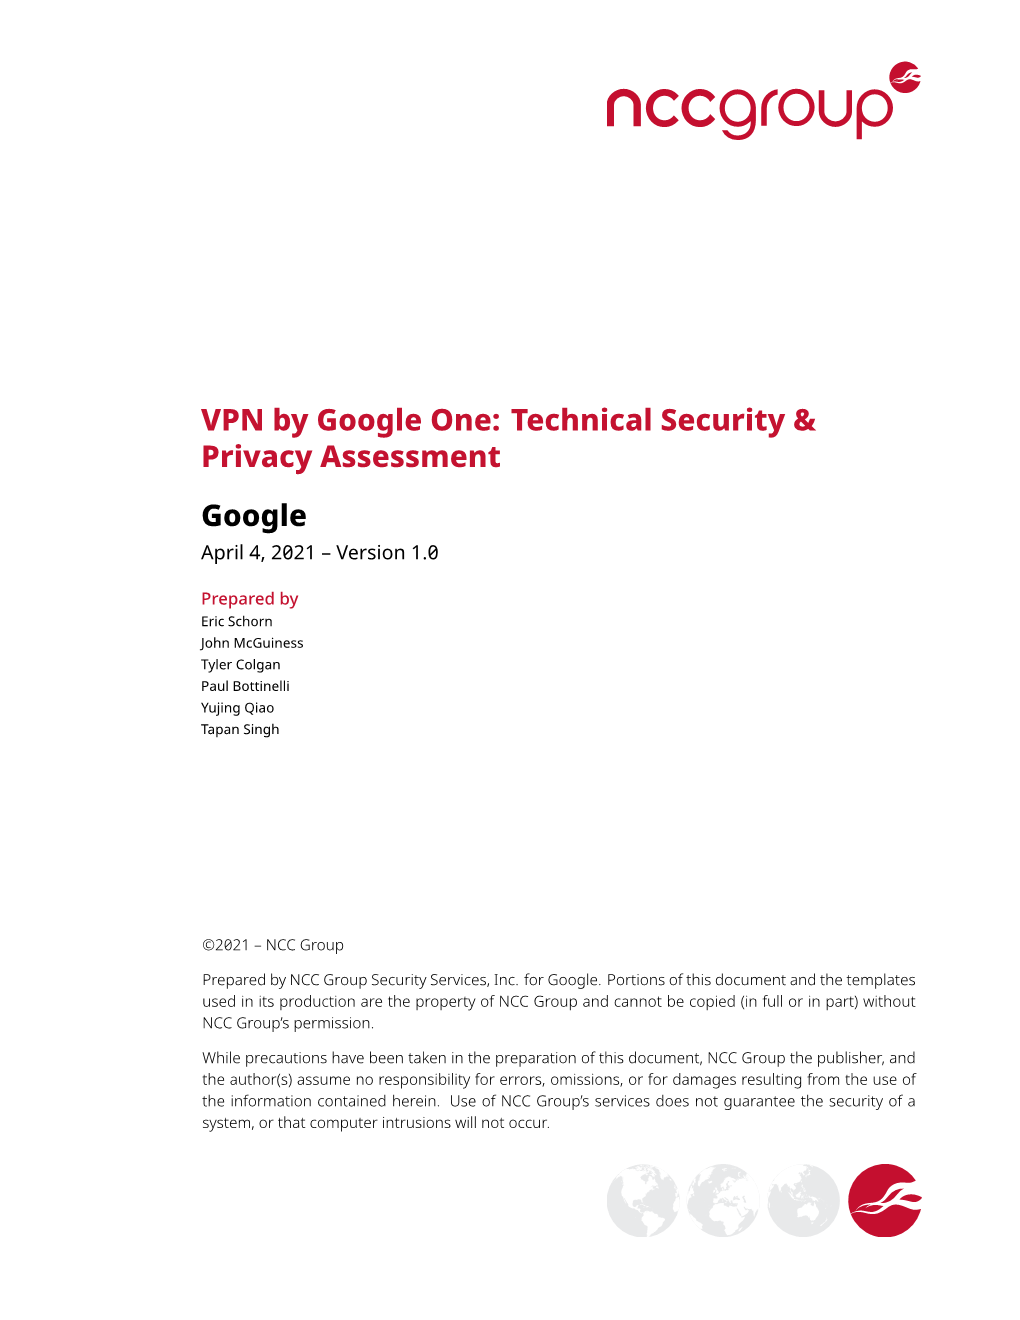 VPN by Google One: Technical Security & Privacy Assessment Google April 4, 2021 – Version 1.0